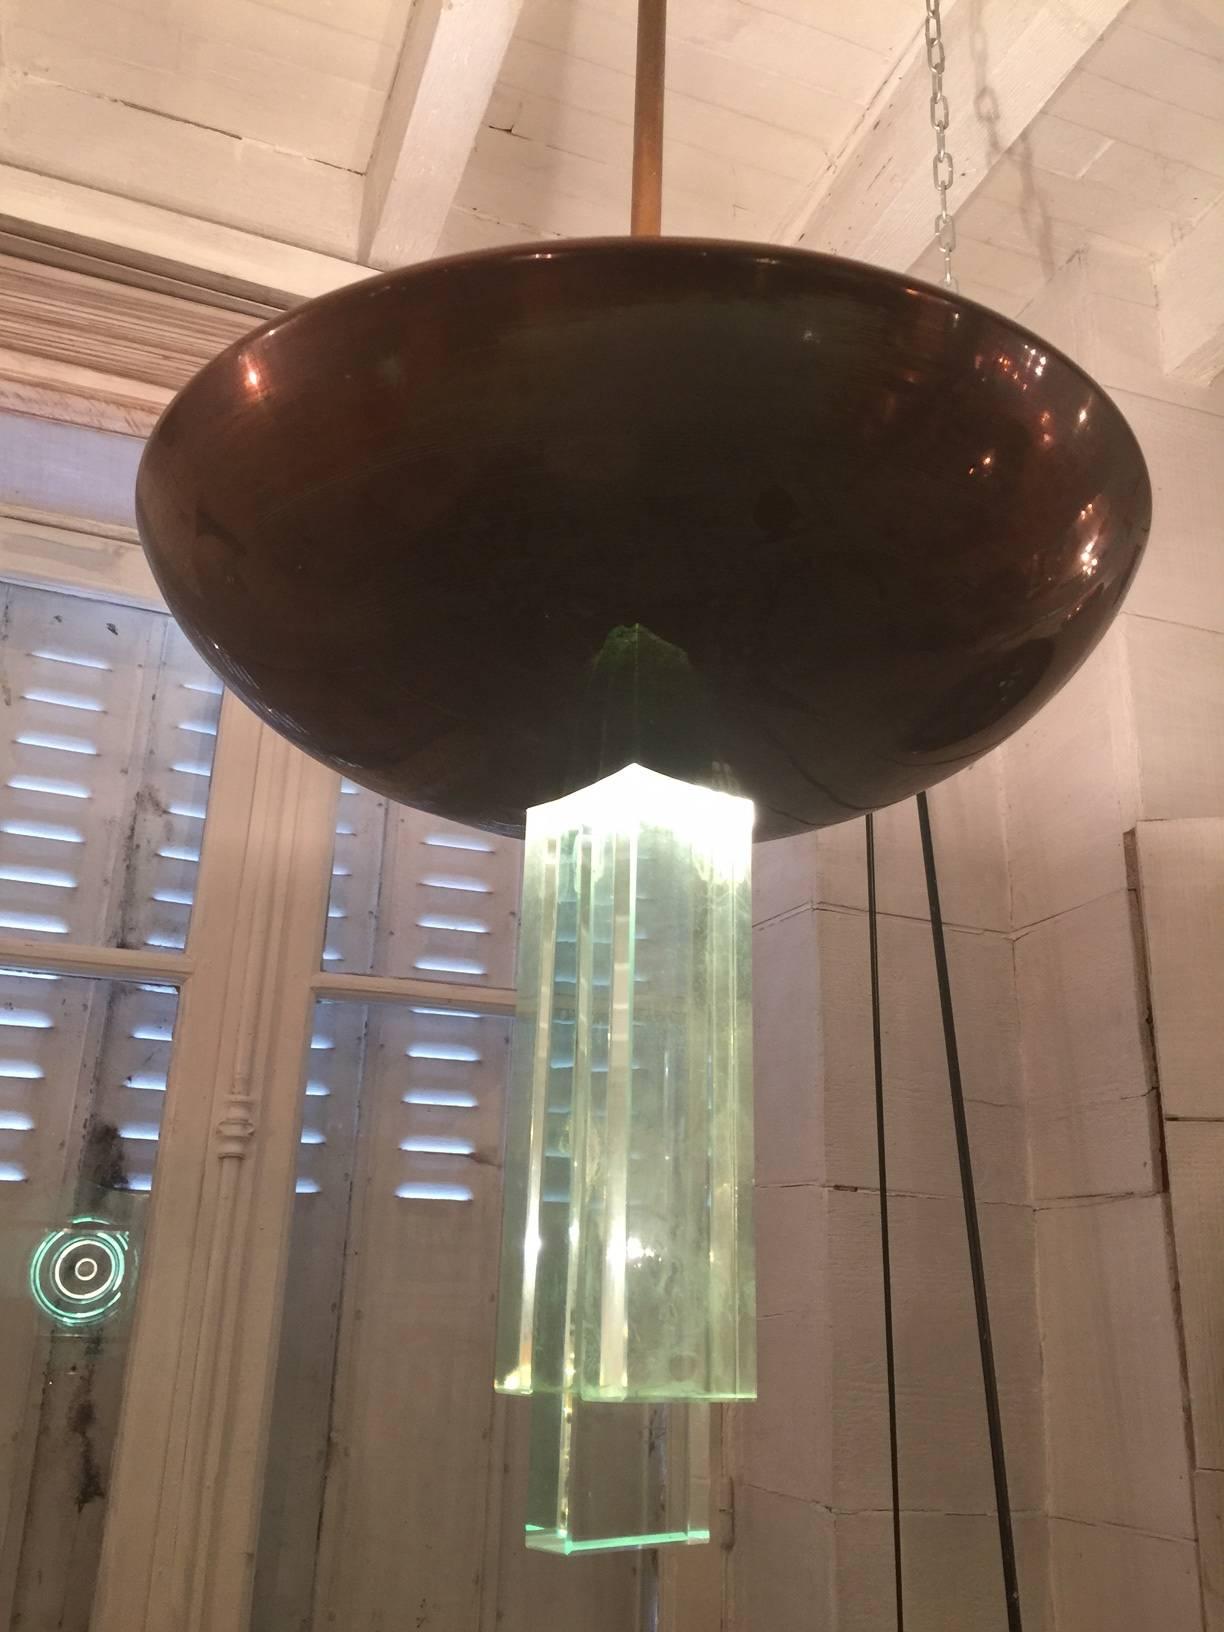 Stunning rare chandelier, Design Gio Ponti Pietro Chiesa, Fountain Art, 1930.
Copper metal structure, glass light diffuser, original left, electrical system to be restored, we keep the certificate of Gio Gio Ponti archive.